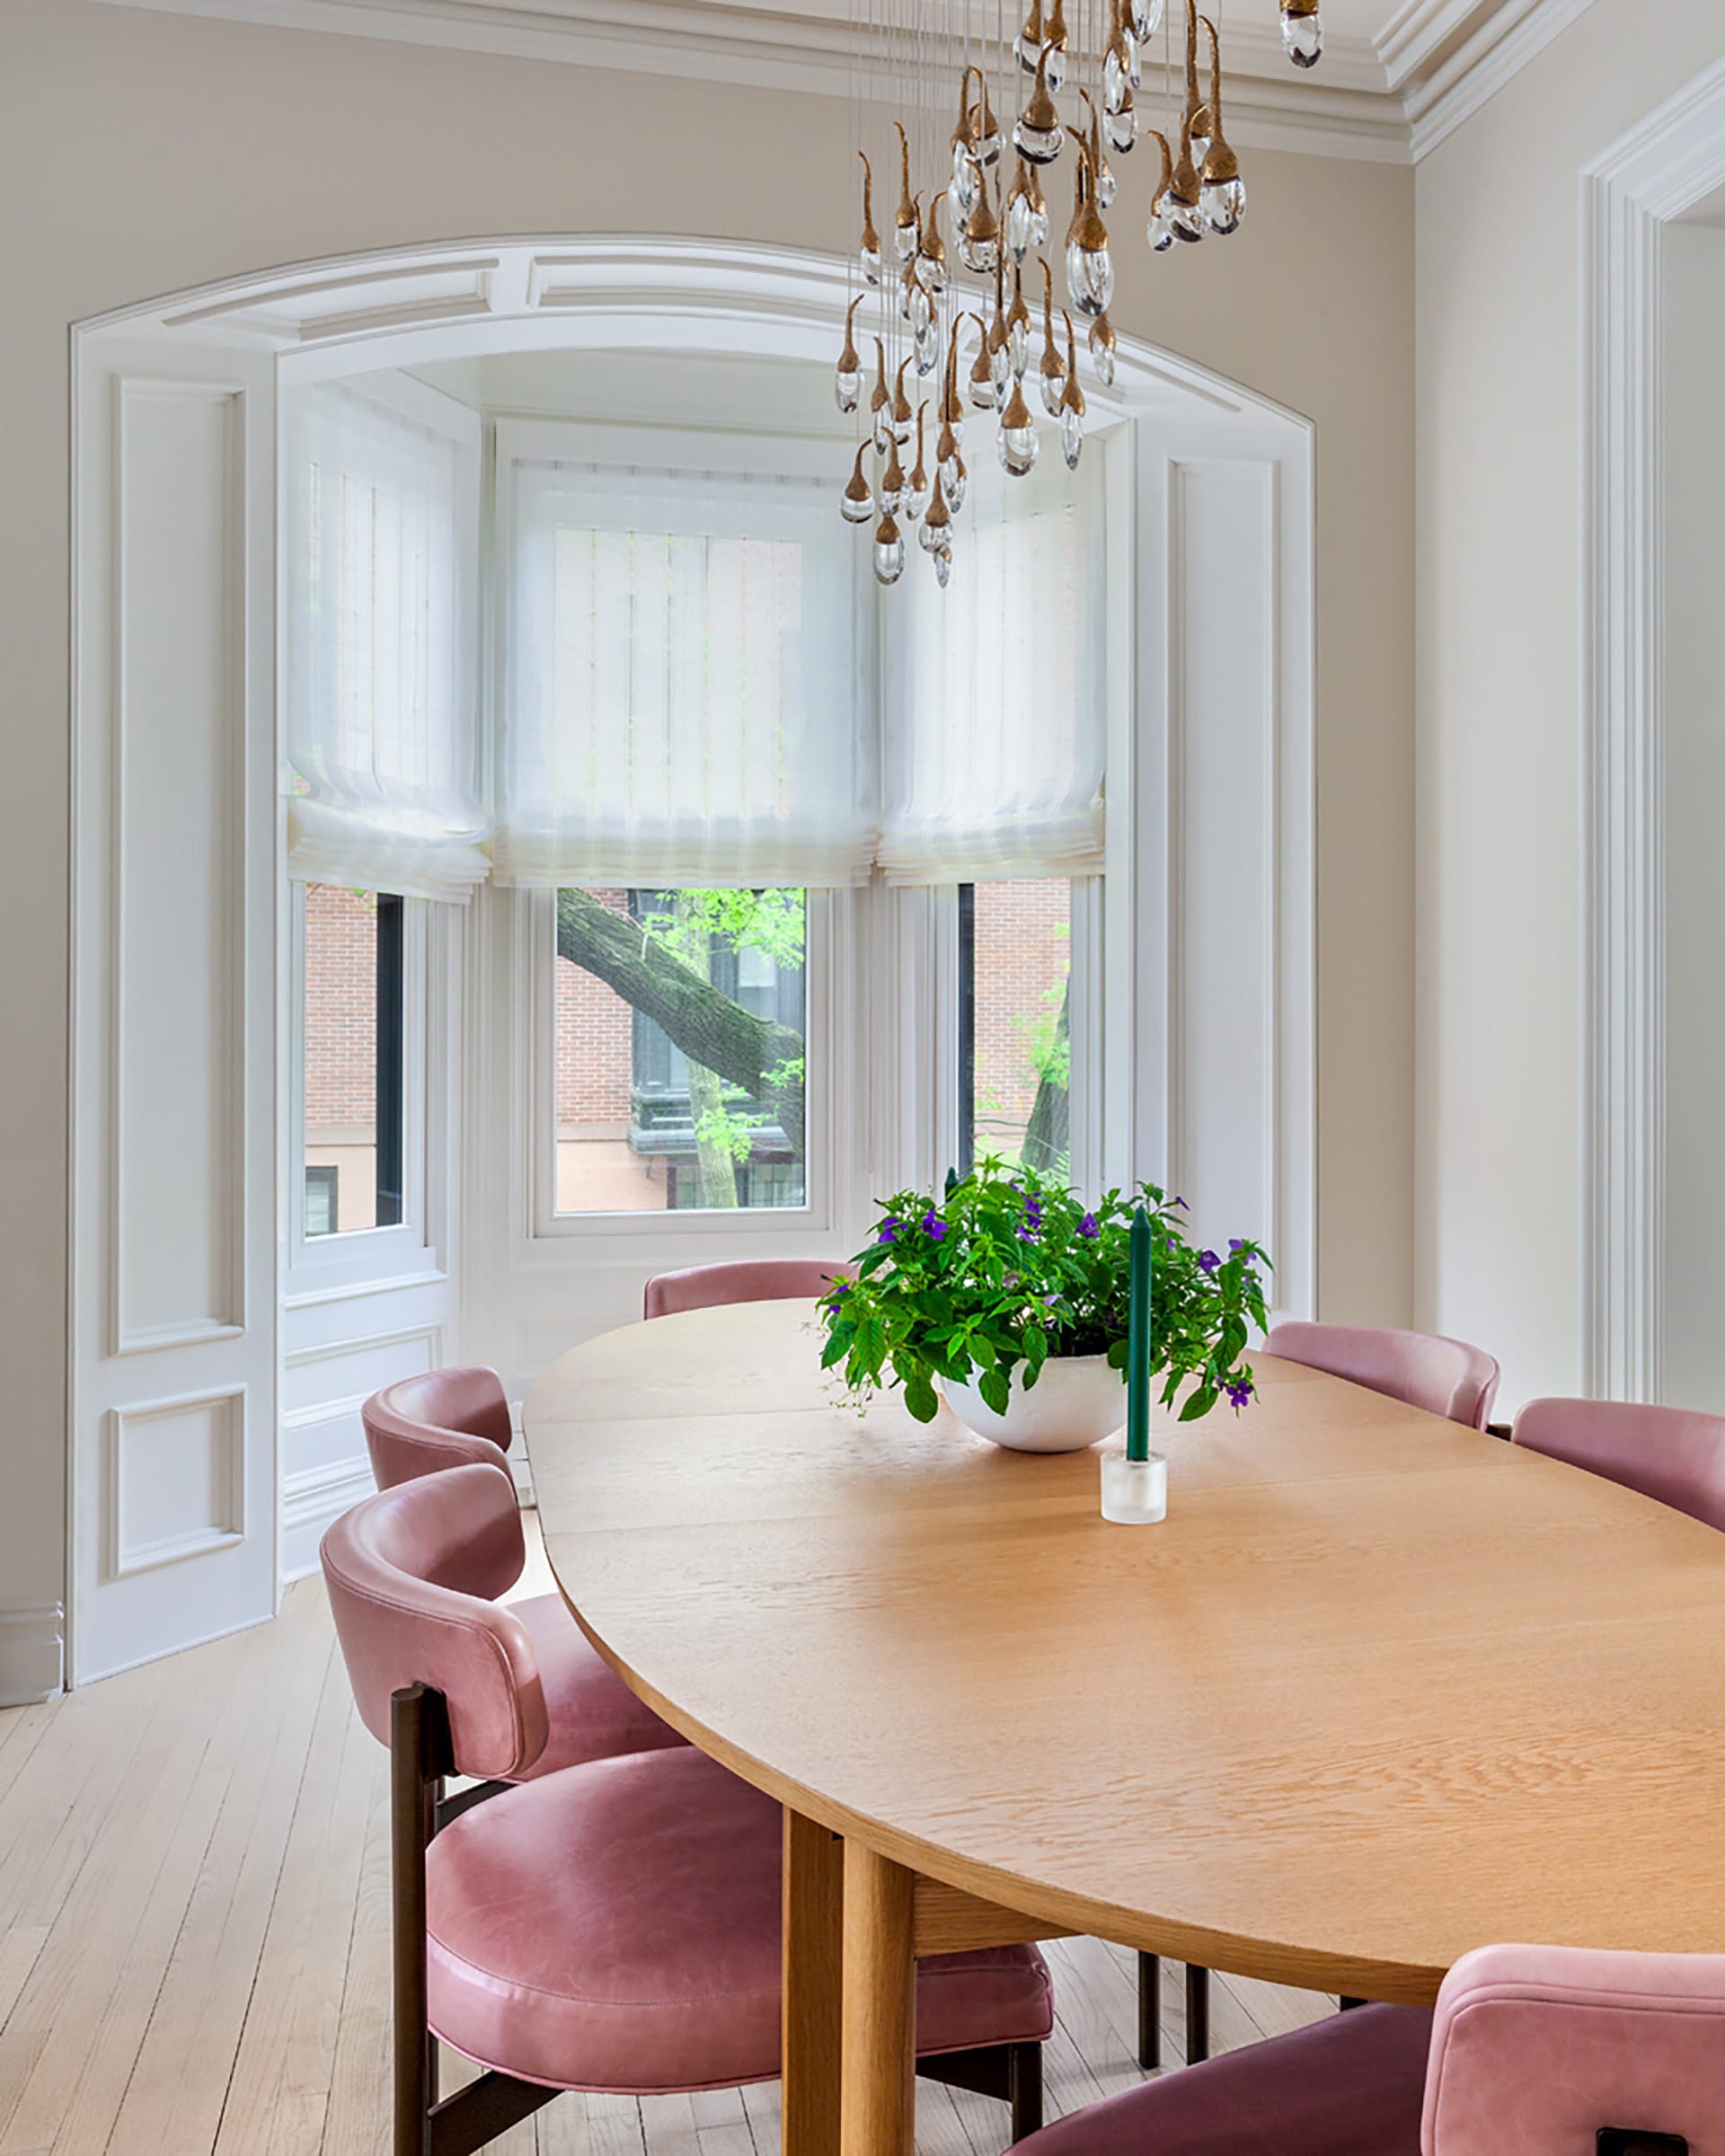 Bay window of a Park Slope home after renovation, widened and painted white to allow more natural light to enter the room.